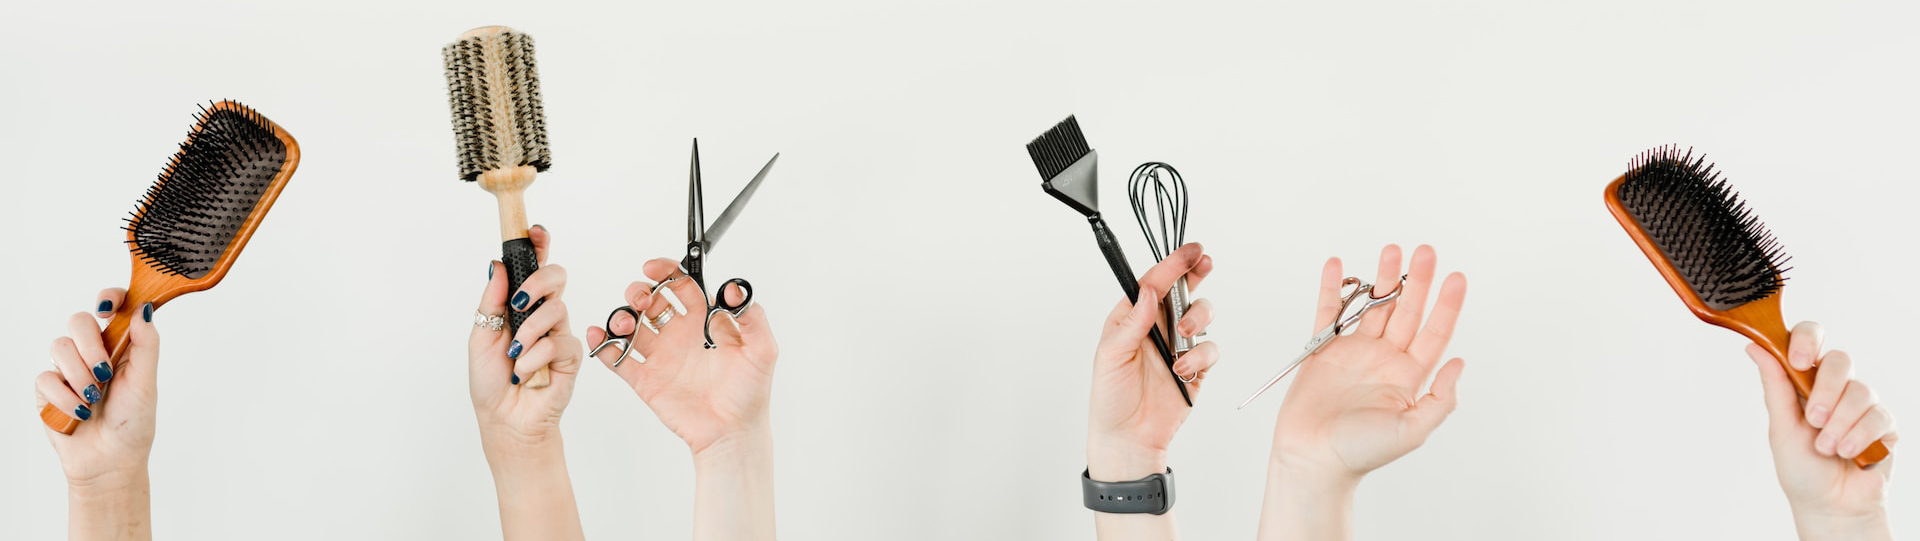 Six hands, visible from the wrist, hold different hairdressing utensils at the bottom of the picture, for example hairbrushes, haircutting scissors and dyeing brushes